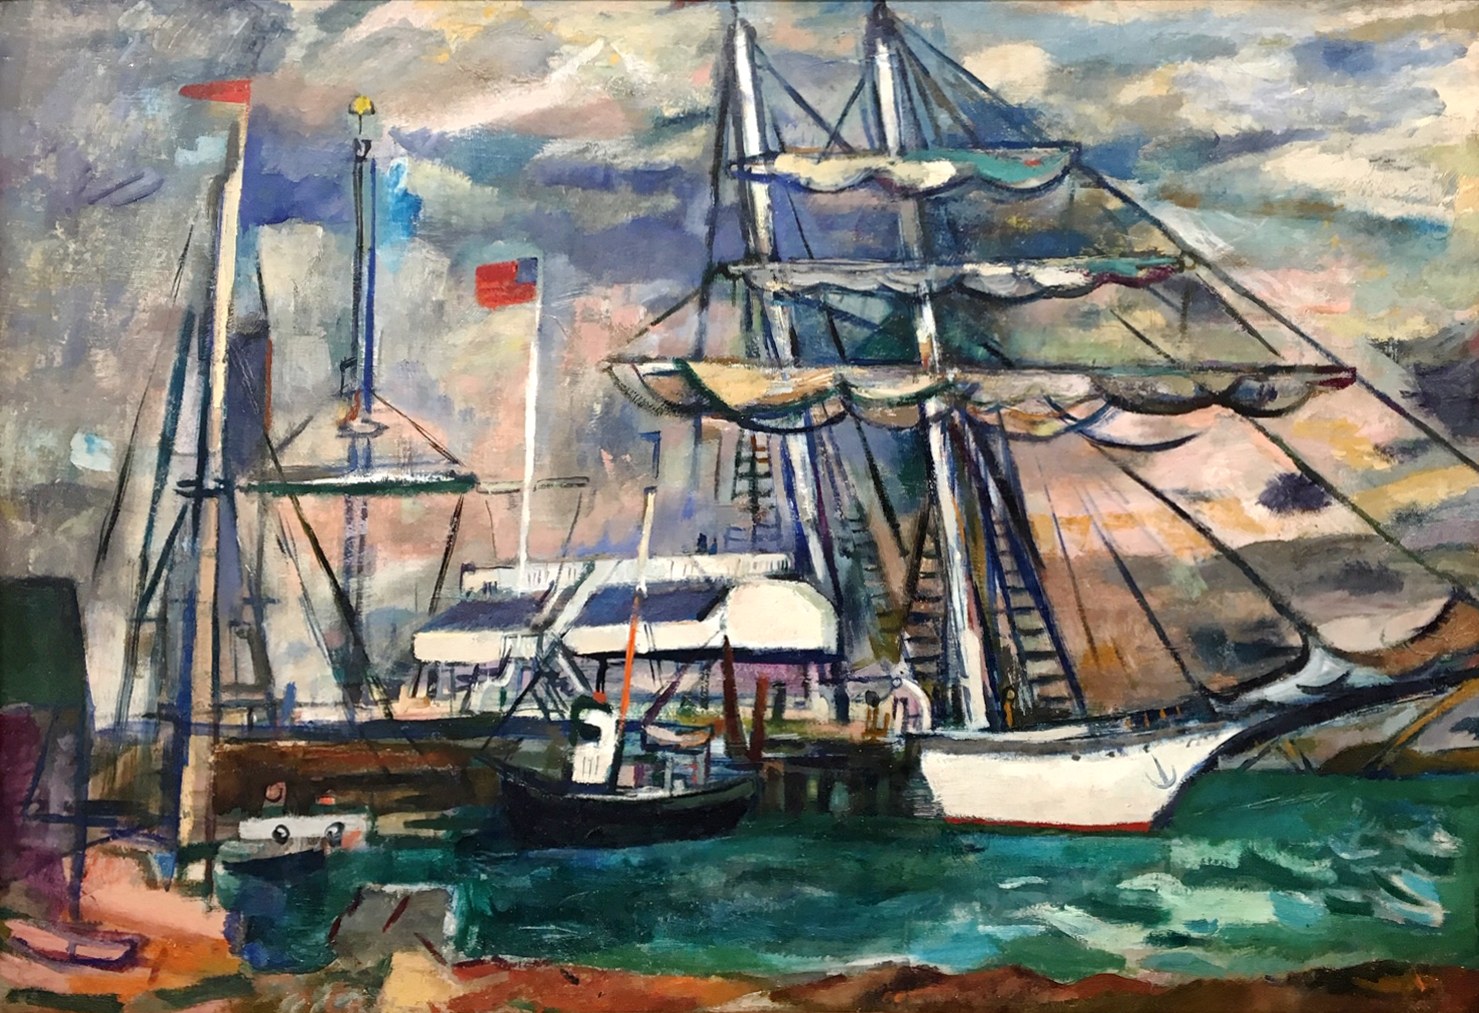 Francis Chapin (Am. 1899-1965)
Ships in Harbor (Martha’s Vineyard)
Oil on canvas, ca. 1950s
27 1/2” x 39”  (Framed: 33” x 46”)
Estate stamped on reverse
